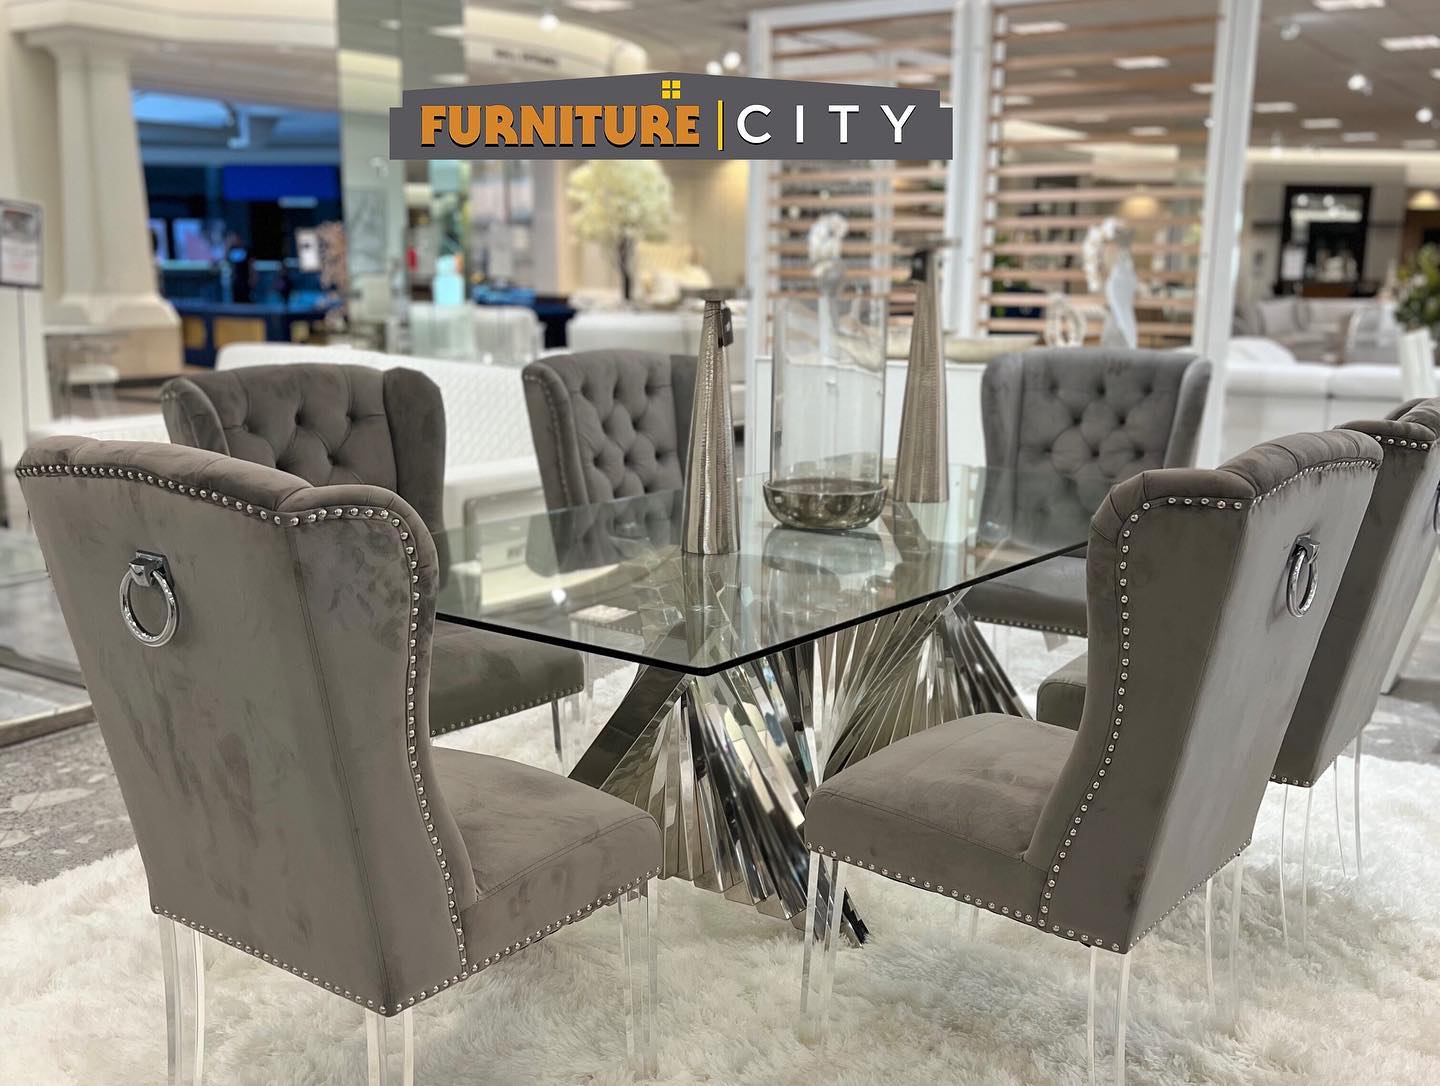 Why Buy Your Dining Room Set From Furniture City, Riverside, CA?